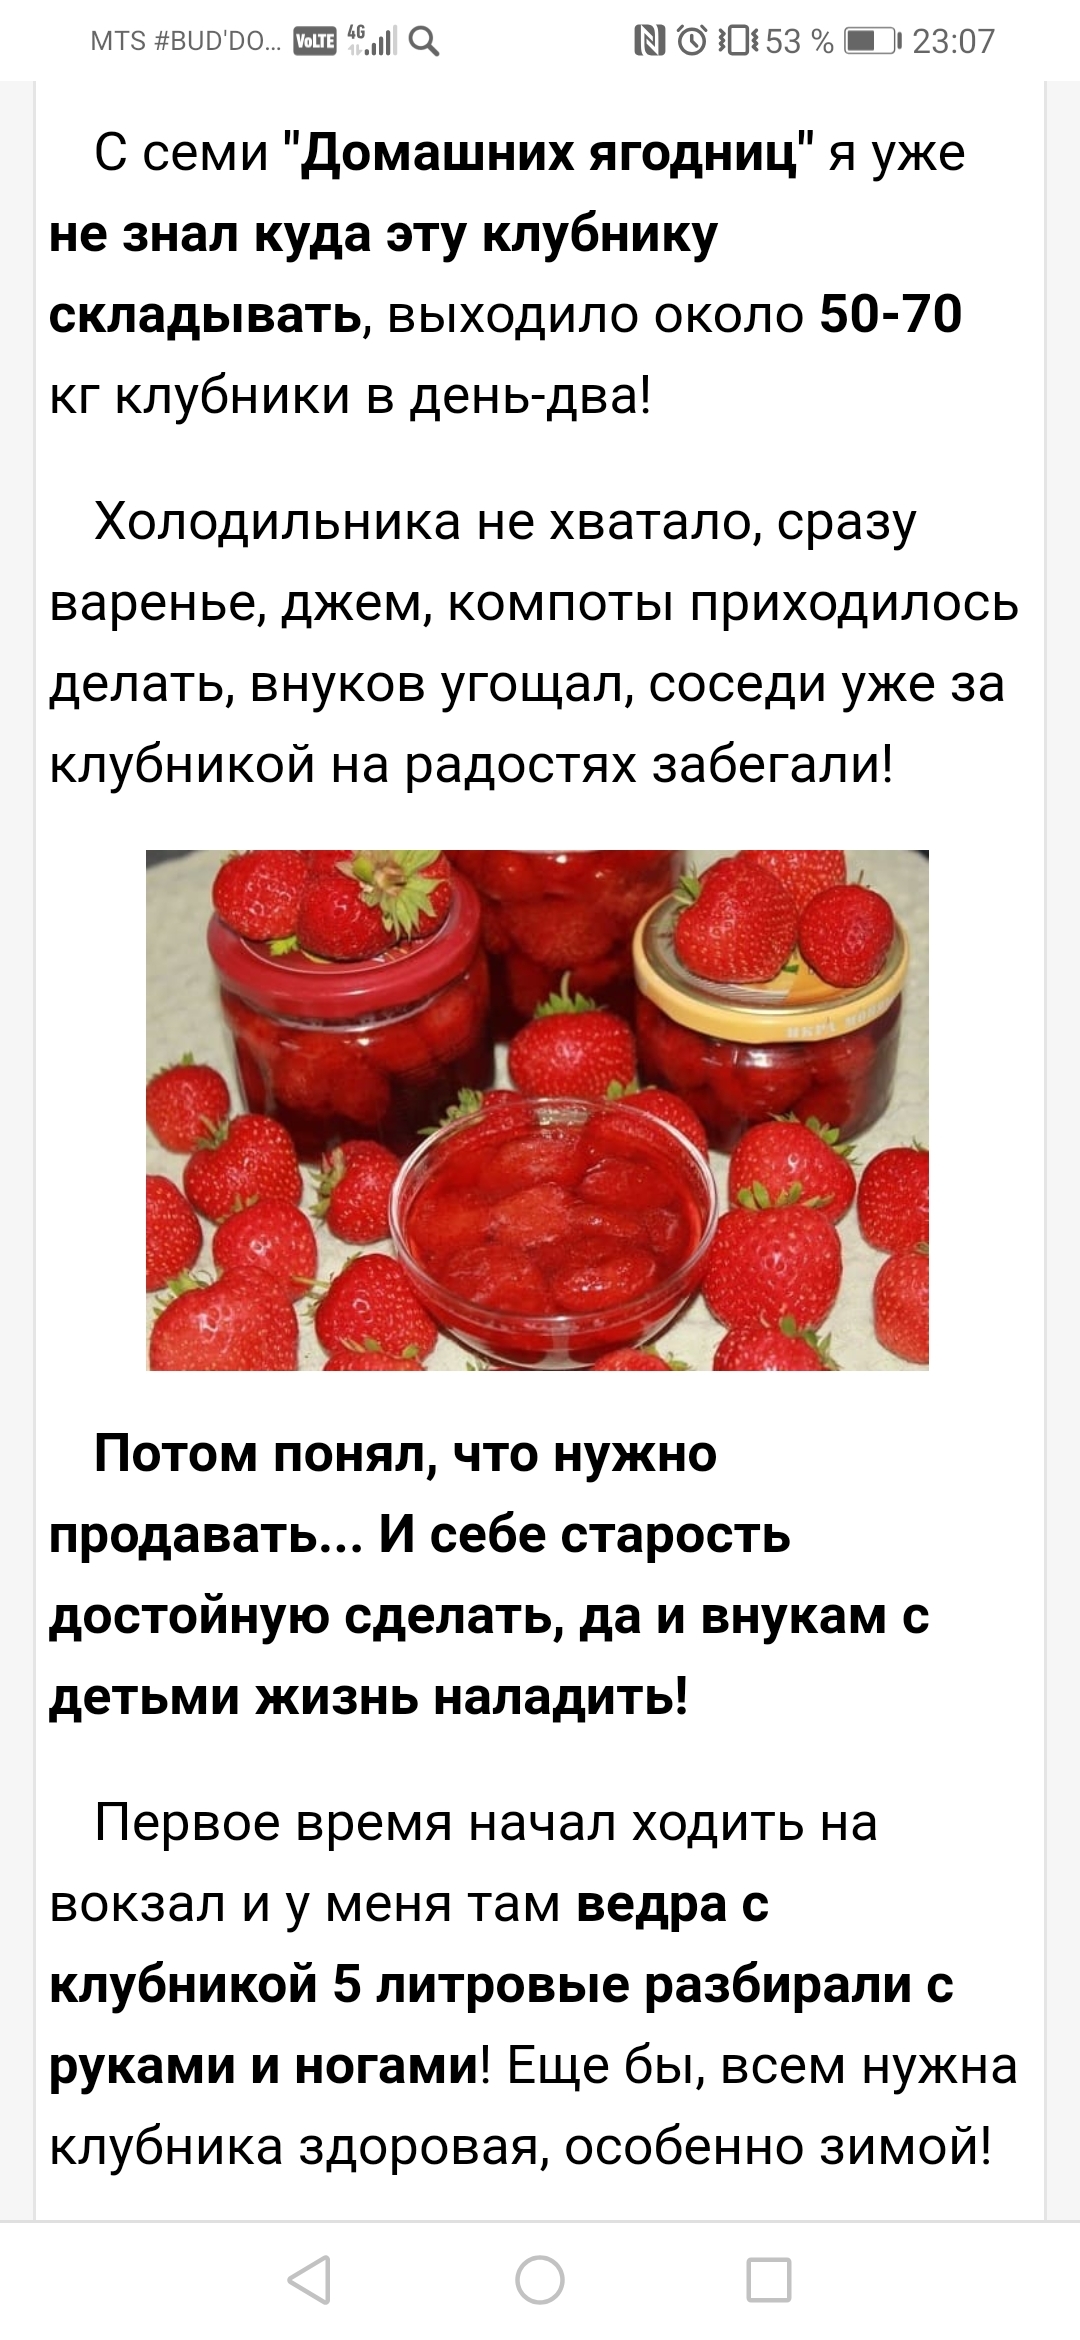 You can grow 10 kg of strawberries per day in your kitchen! Divorce!!! - Divorce for money, Advertising, Longpost, Screenshot, Negative